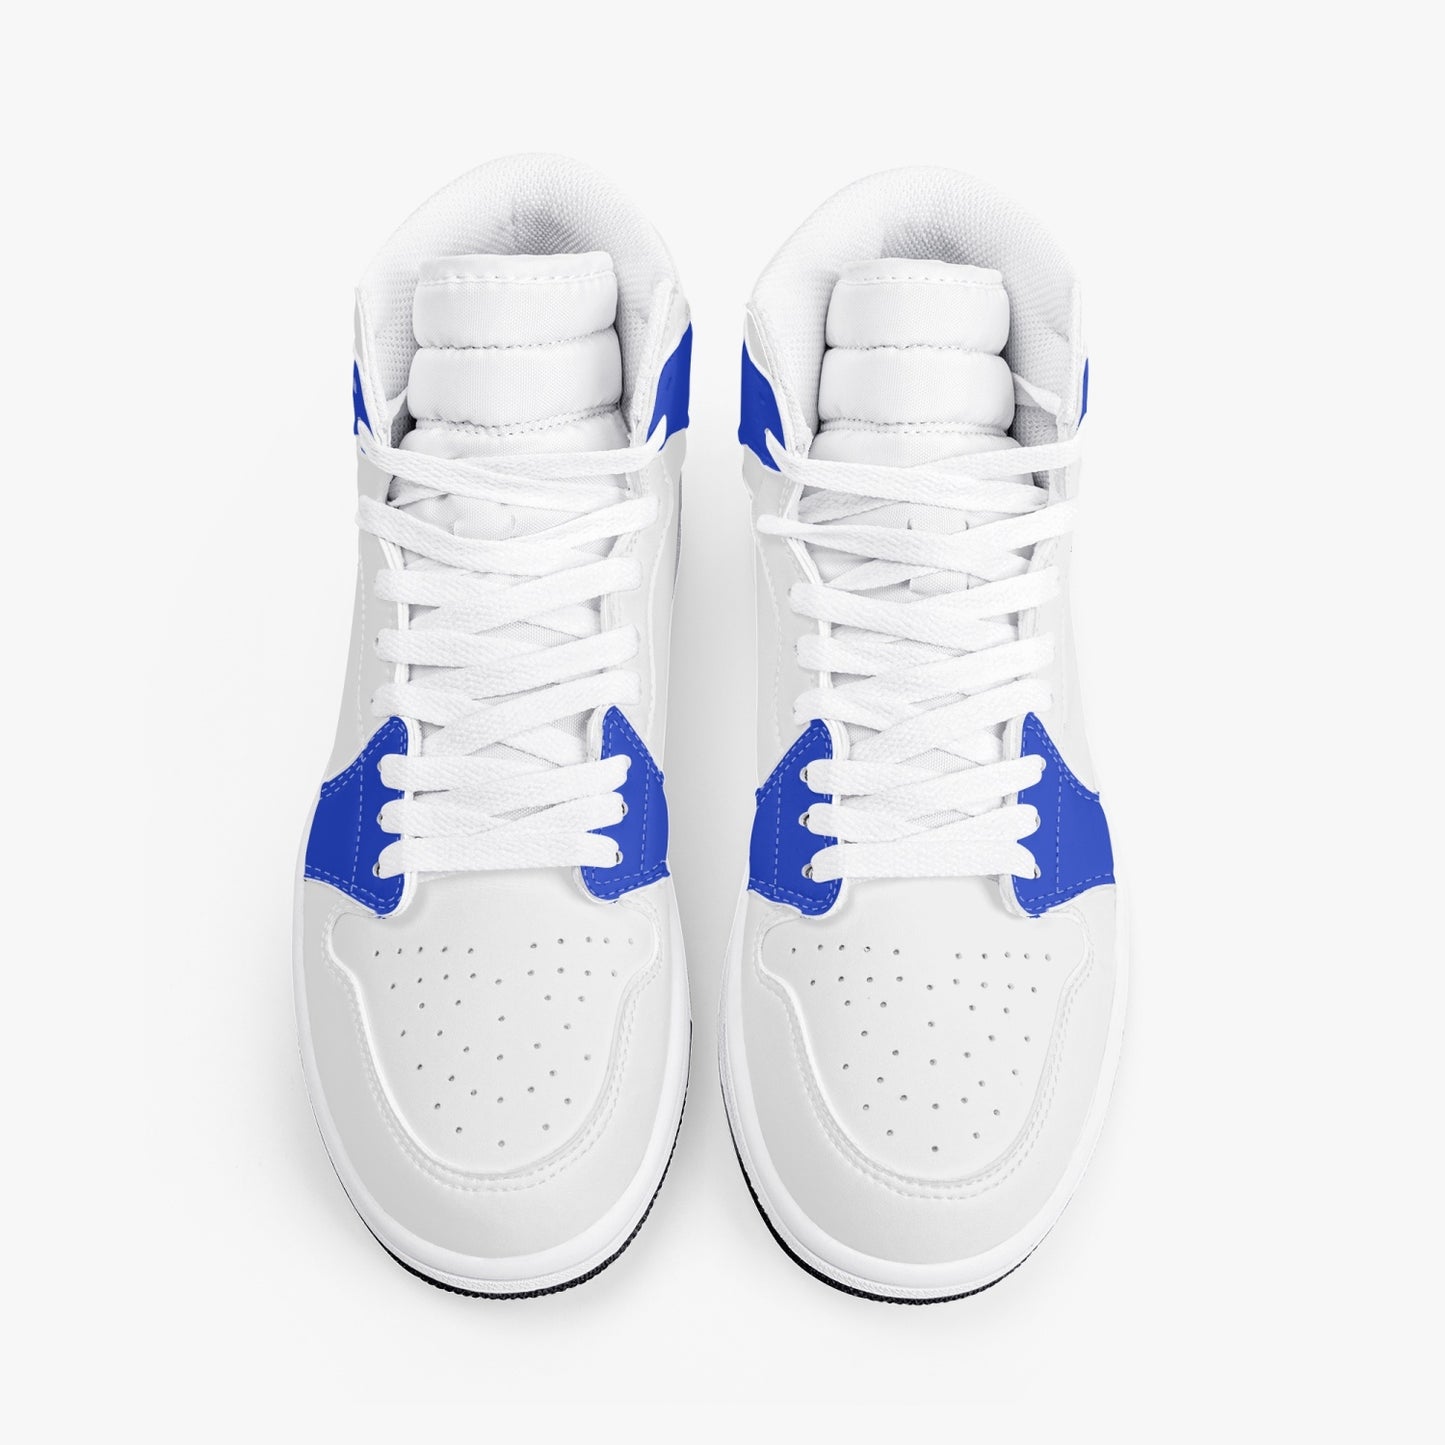 STEVE WILLING F2 MARCH version 3 High-Top Leather Sneakers - white/blue